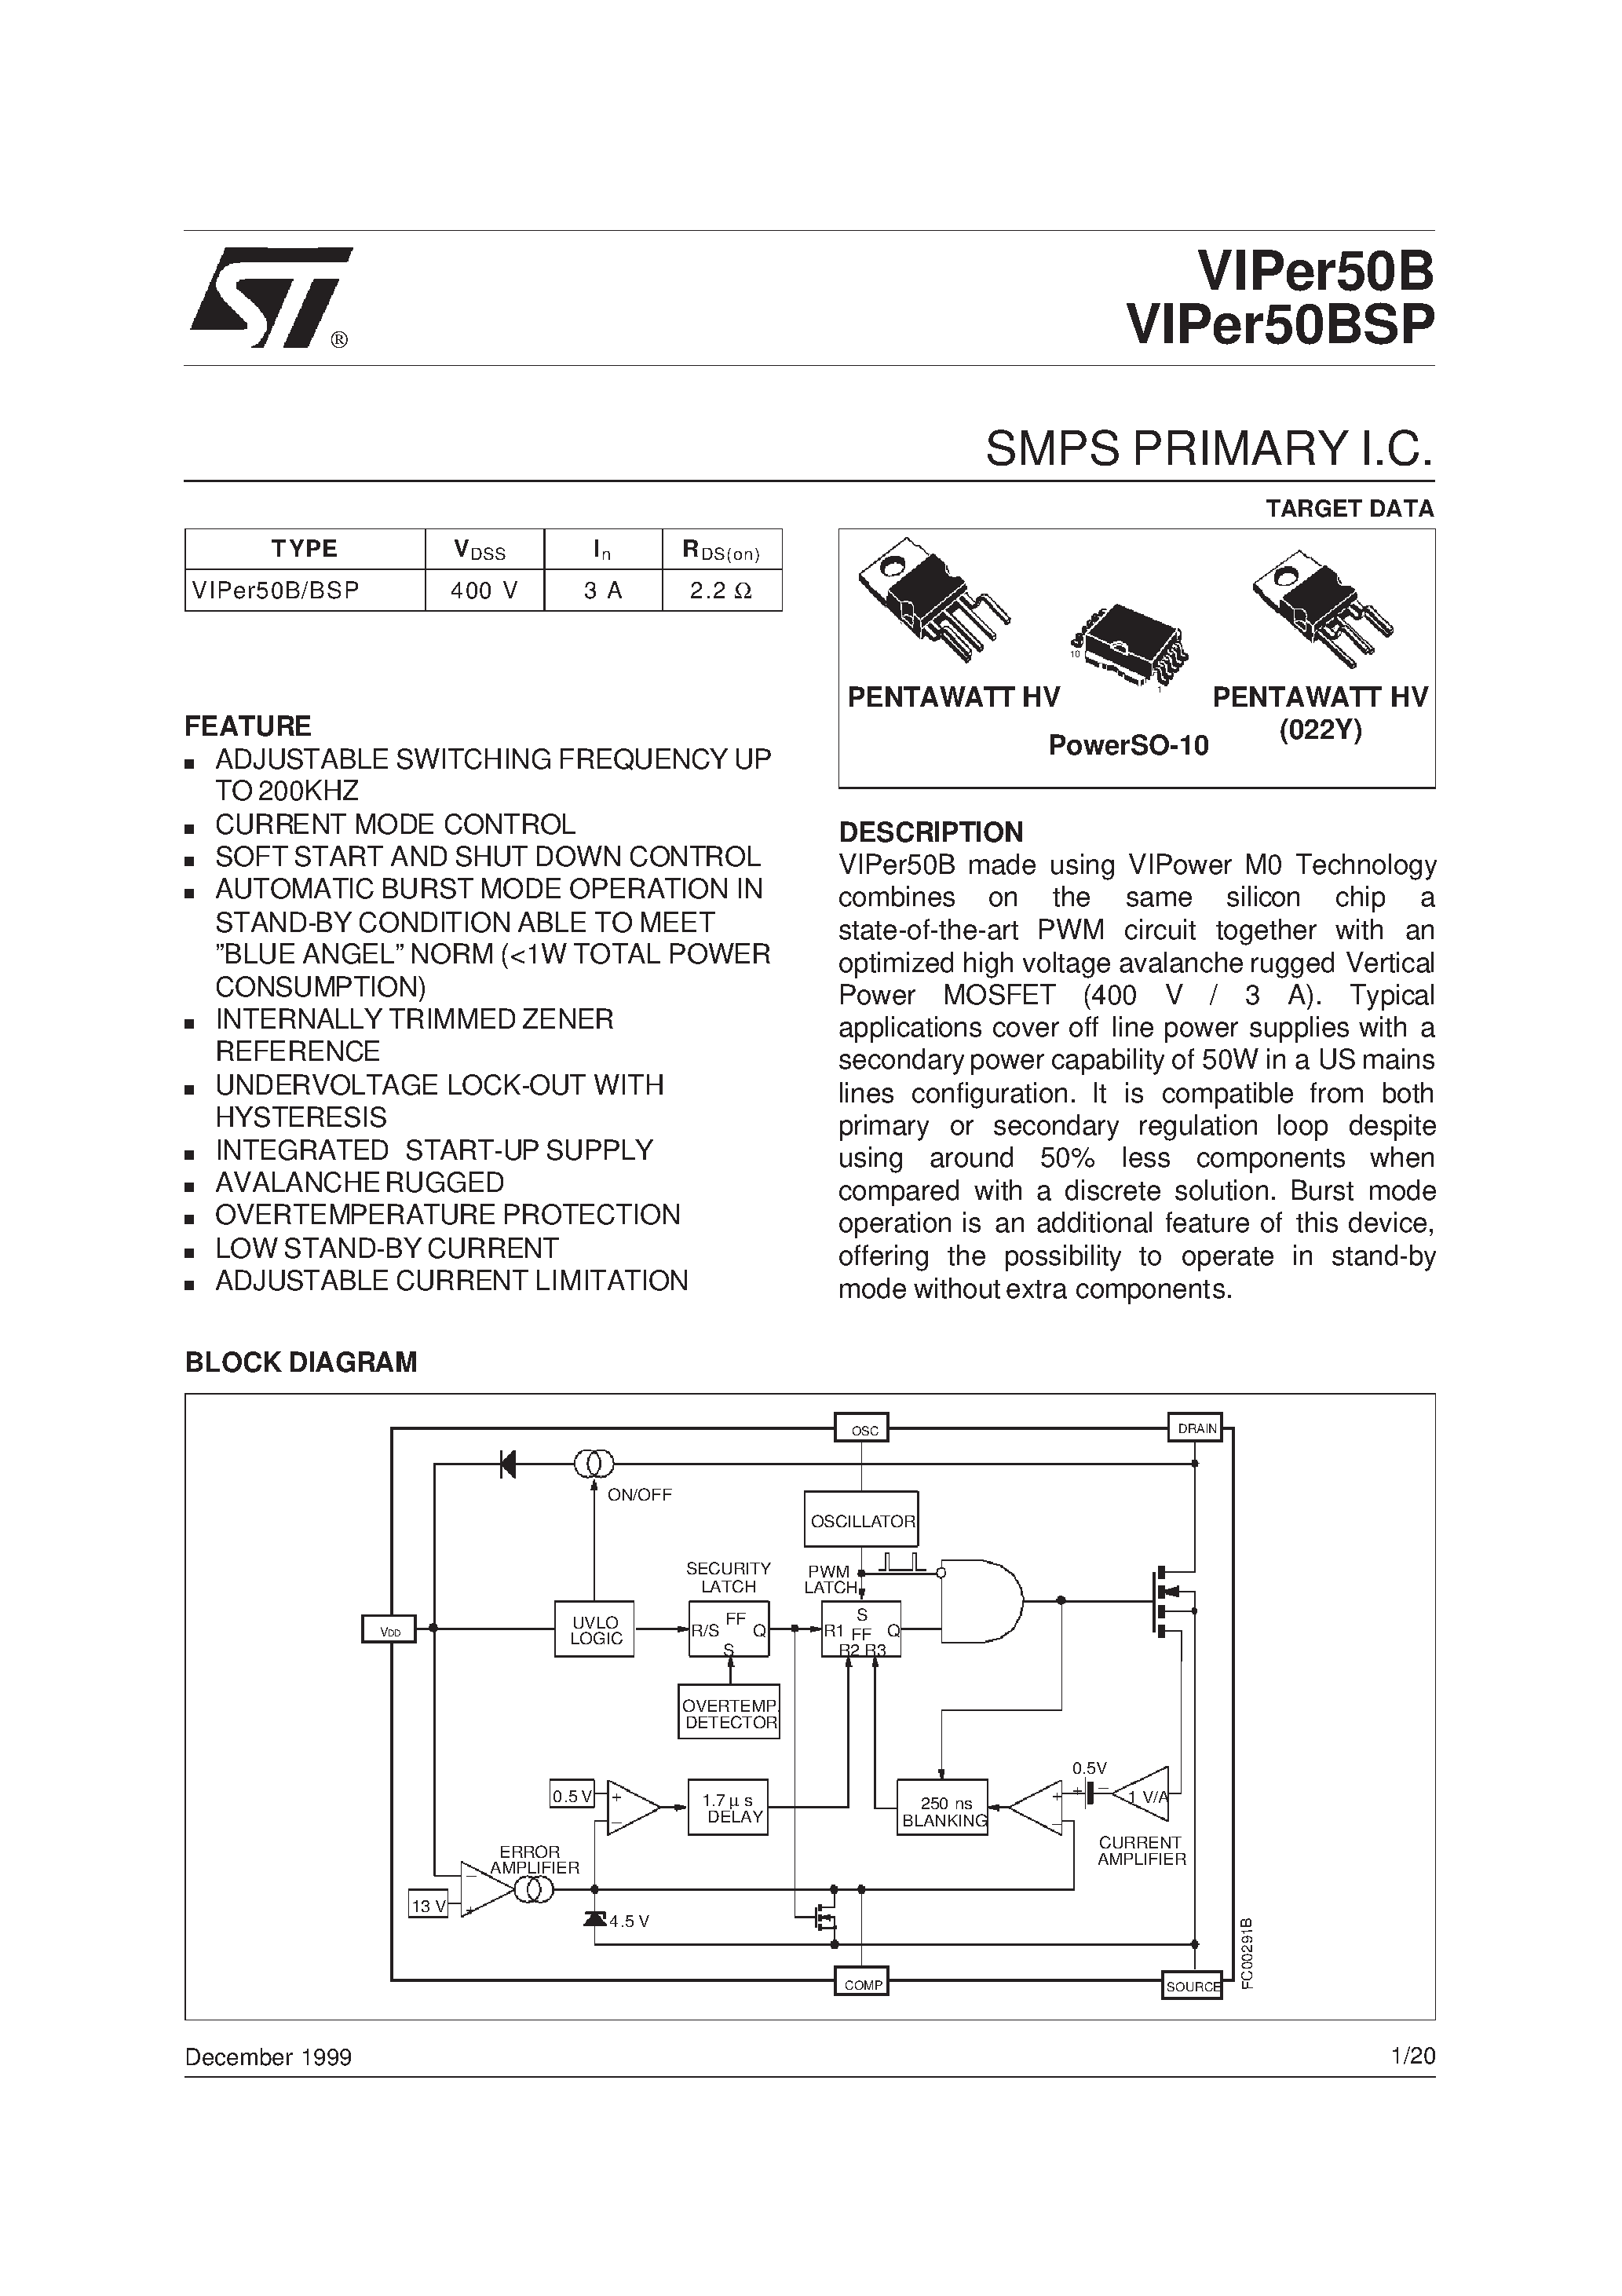 Datasheet VIPER50B - SMPS PRIMARY I.C. page 1